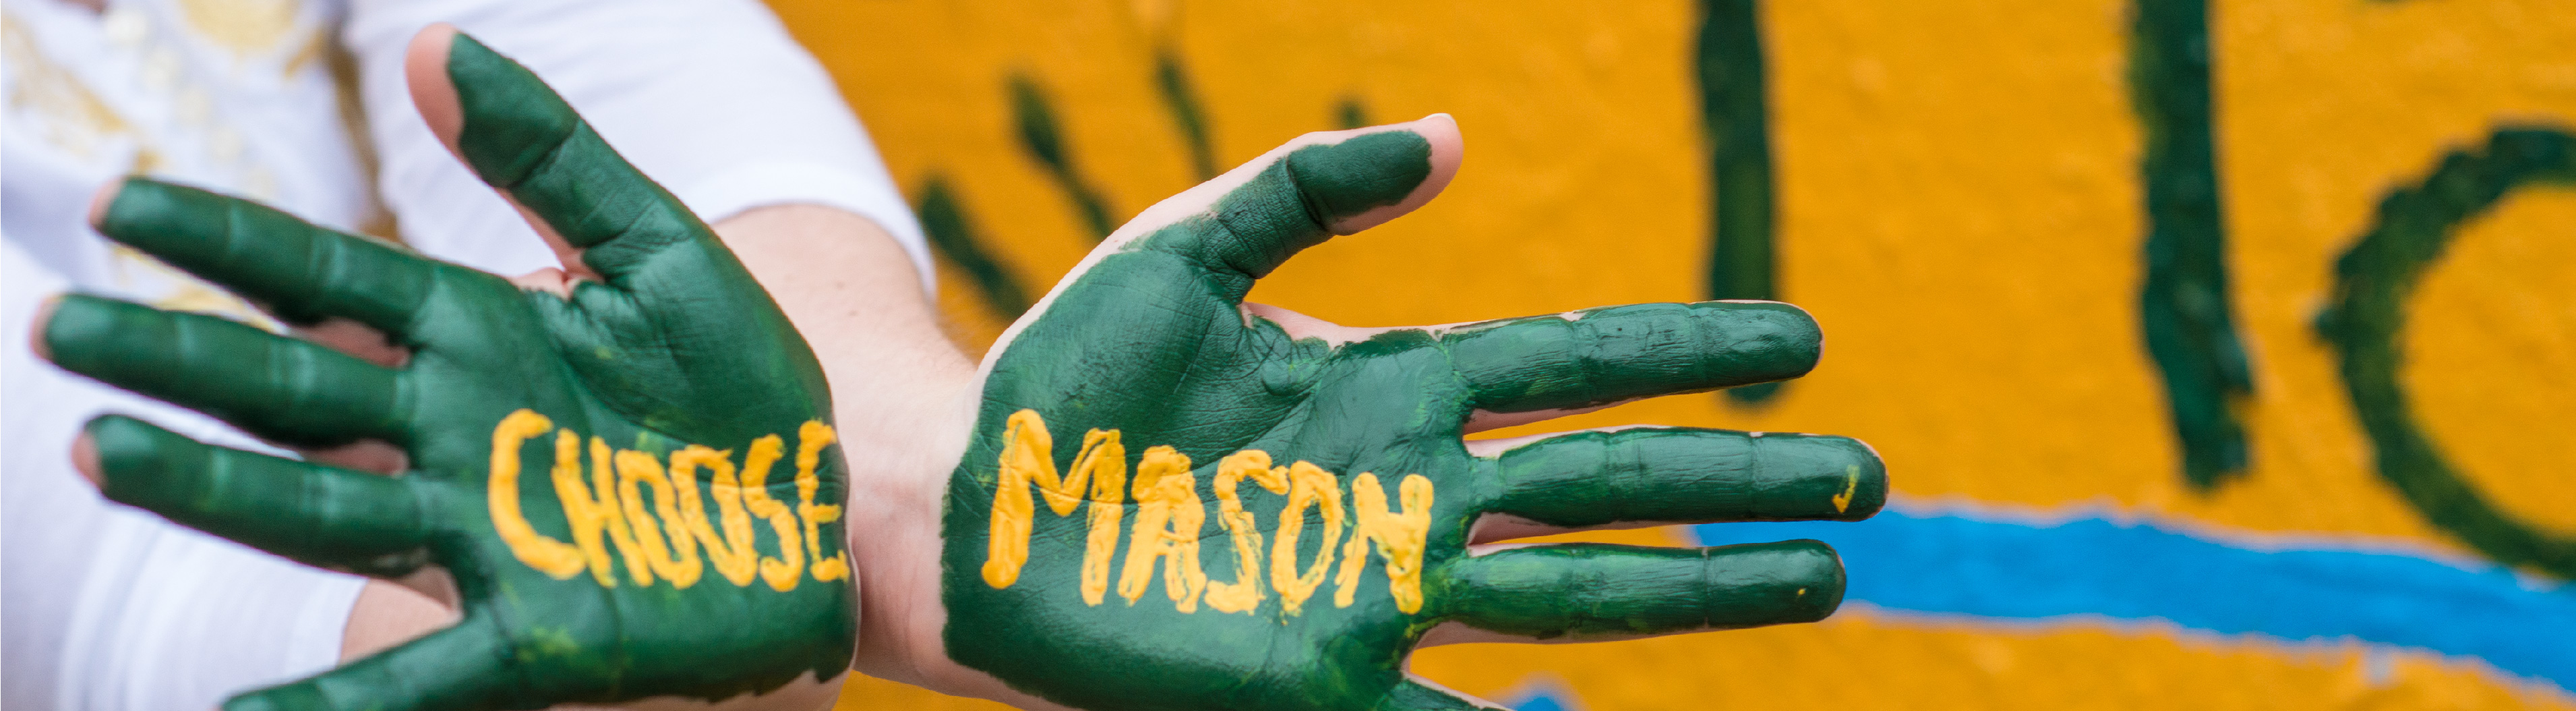 Hands painted with the words Choose Mason